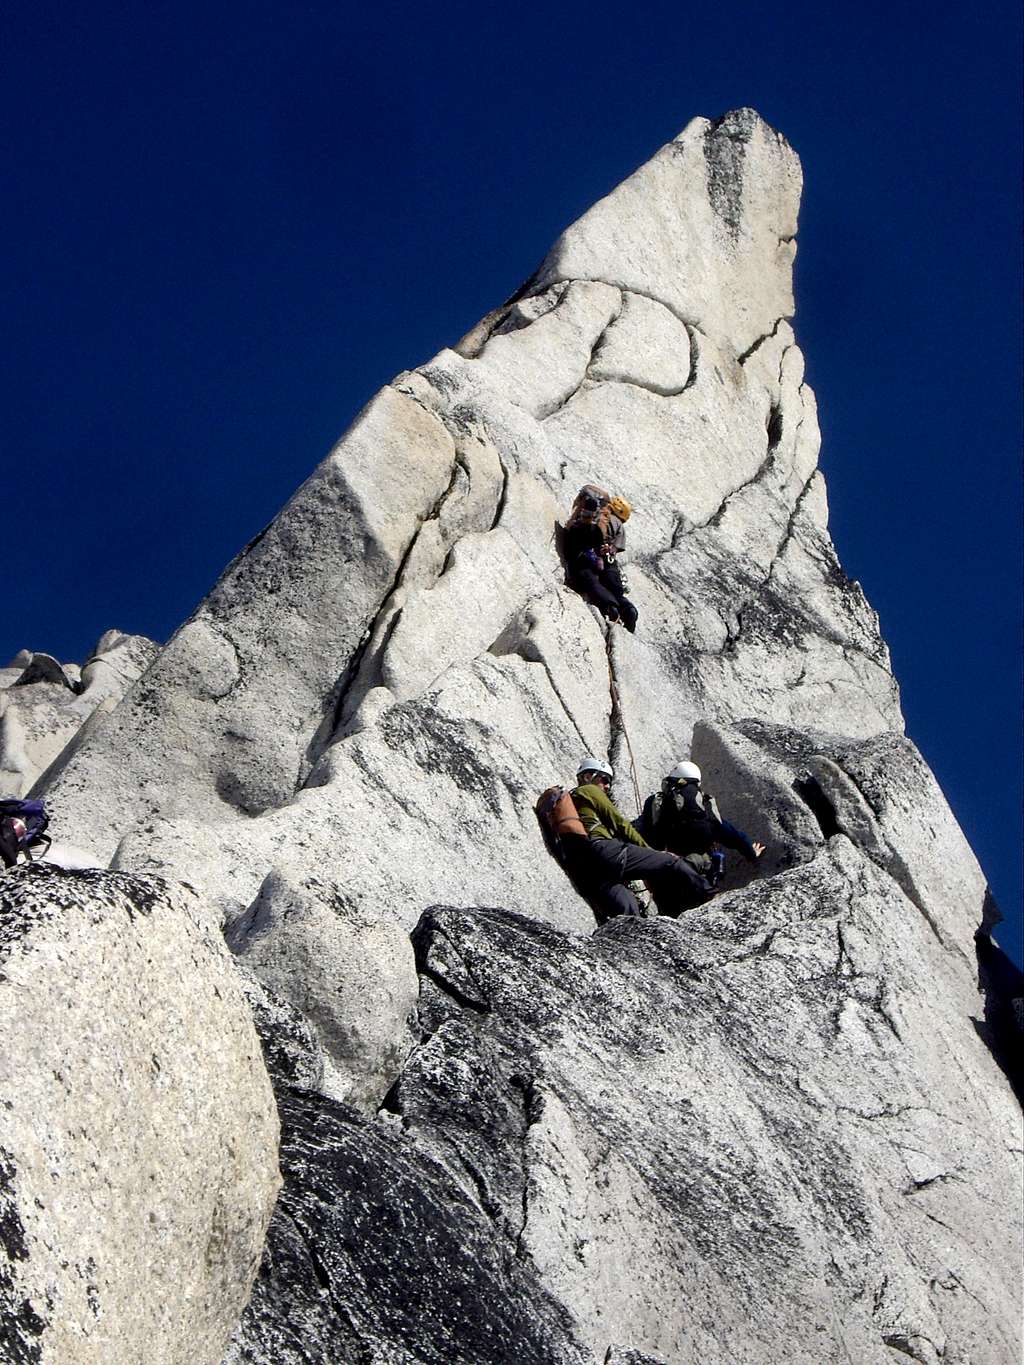 On the Gendarme of Bugaboo Spire